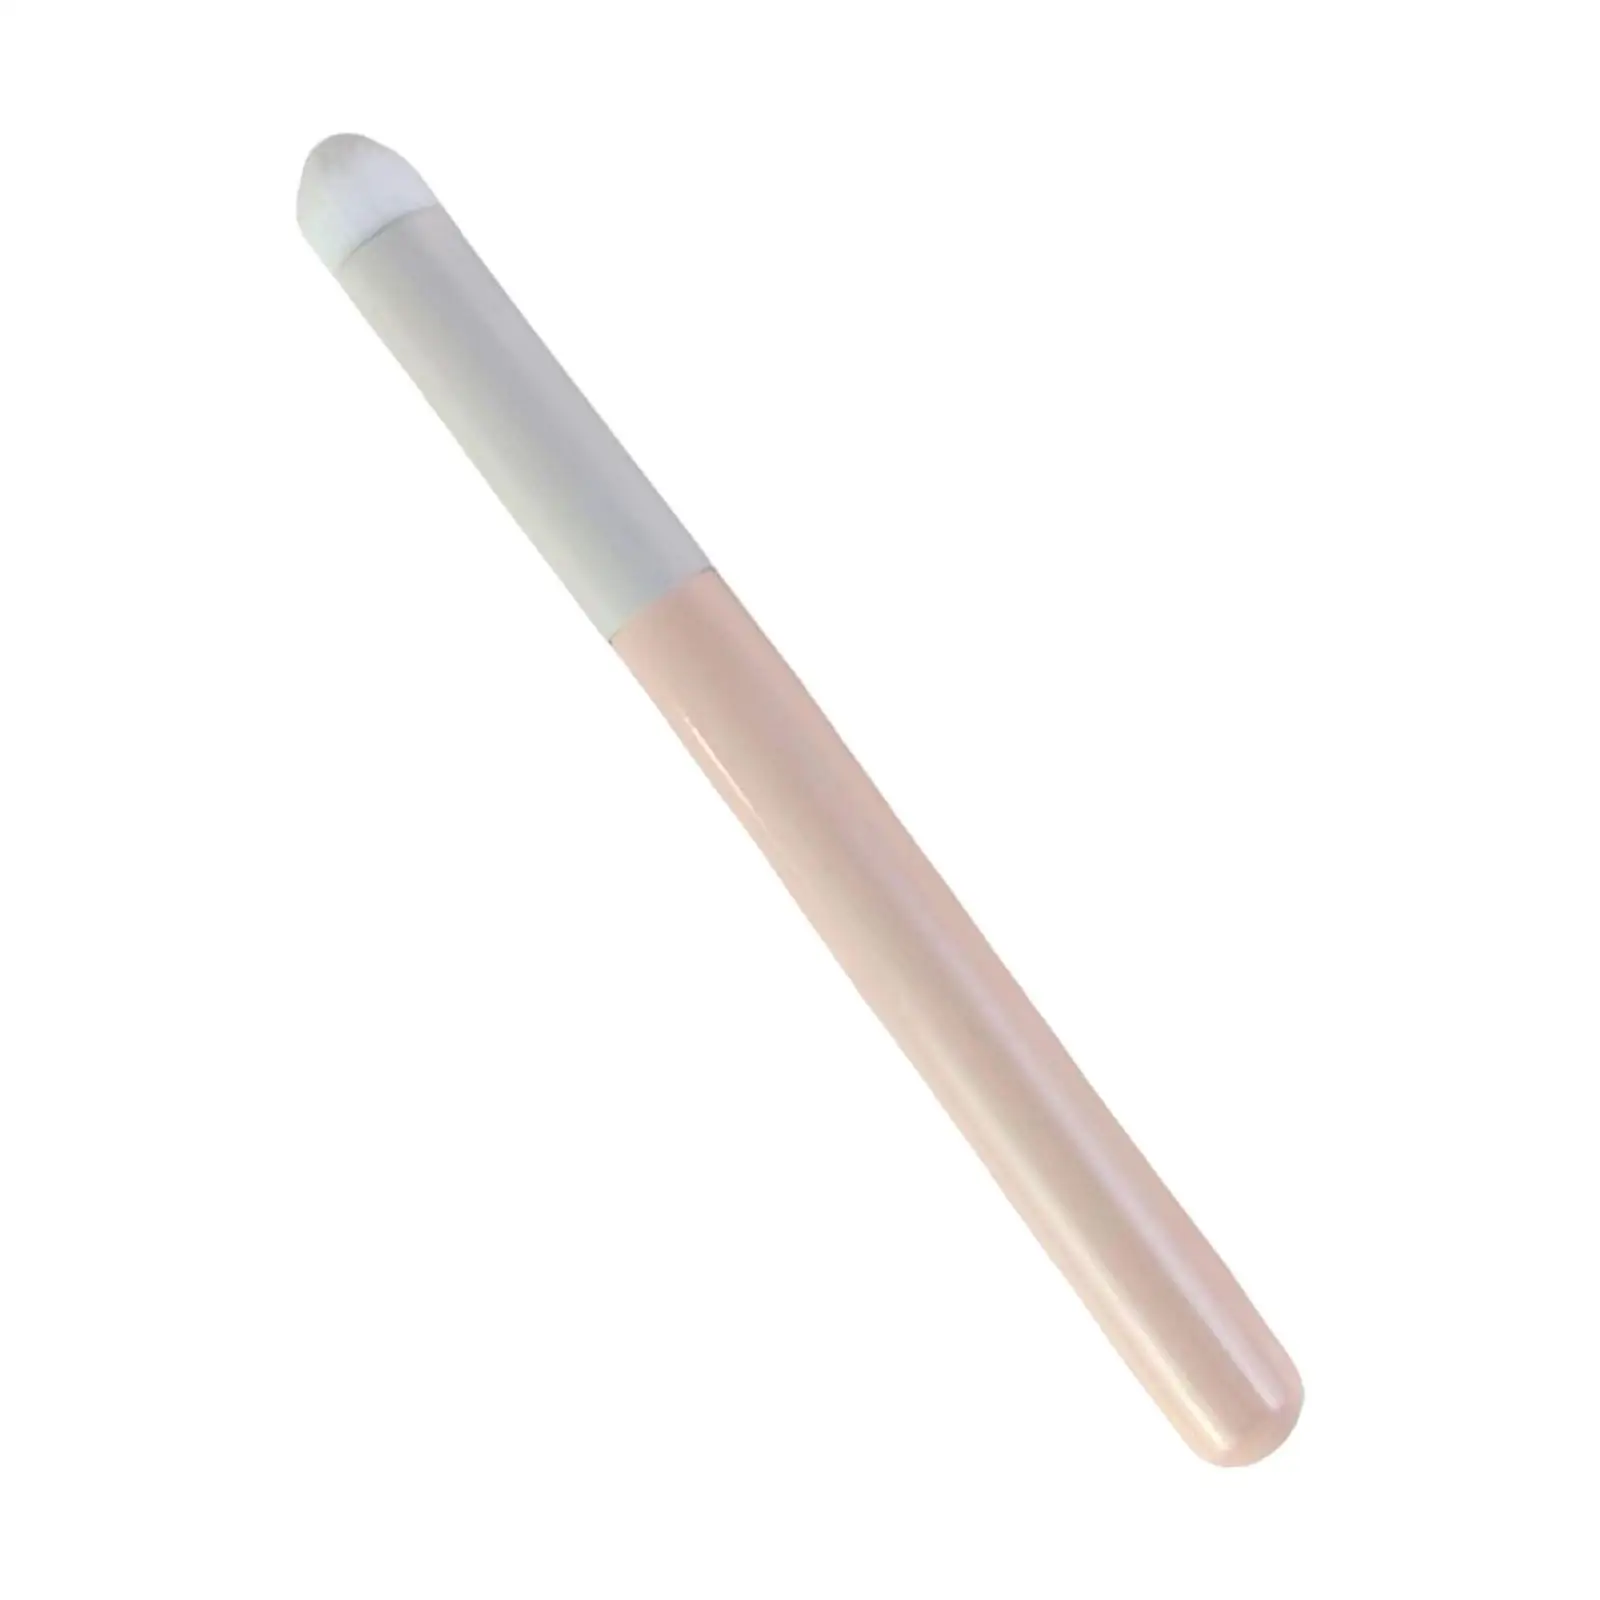 Concealer Makeup Brush, with Long up Easily Cosmetic Make up Brush for Women